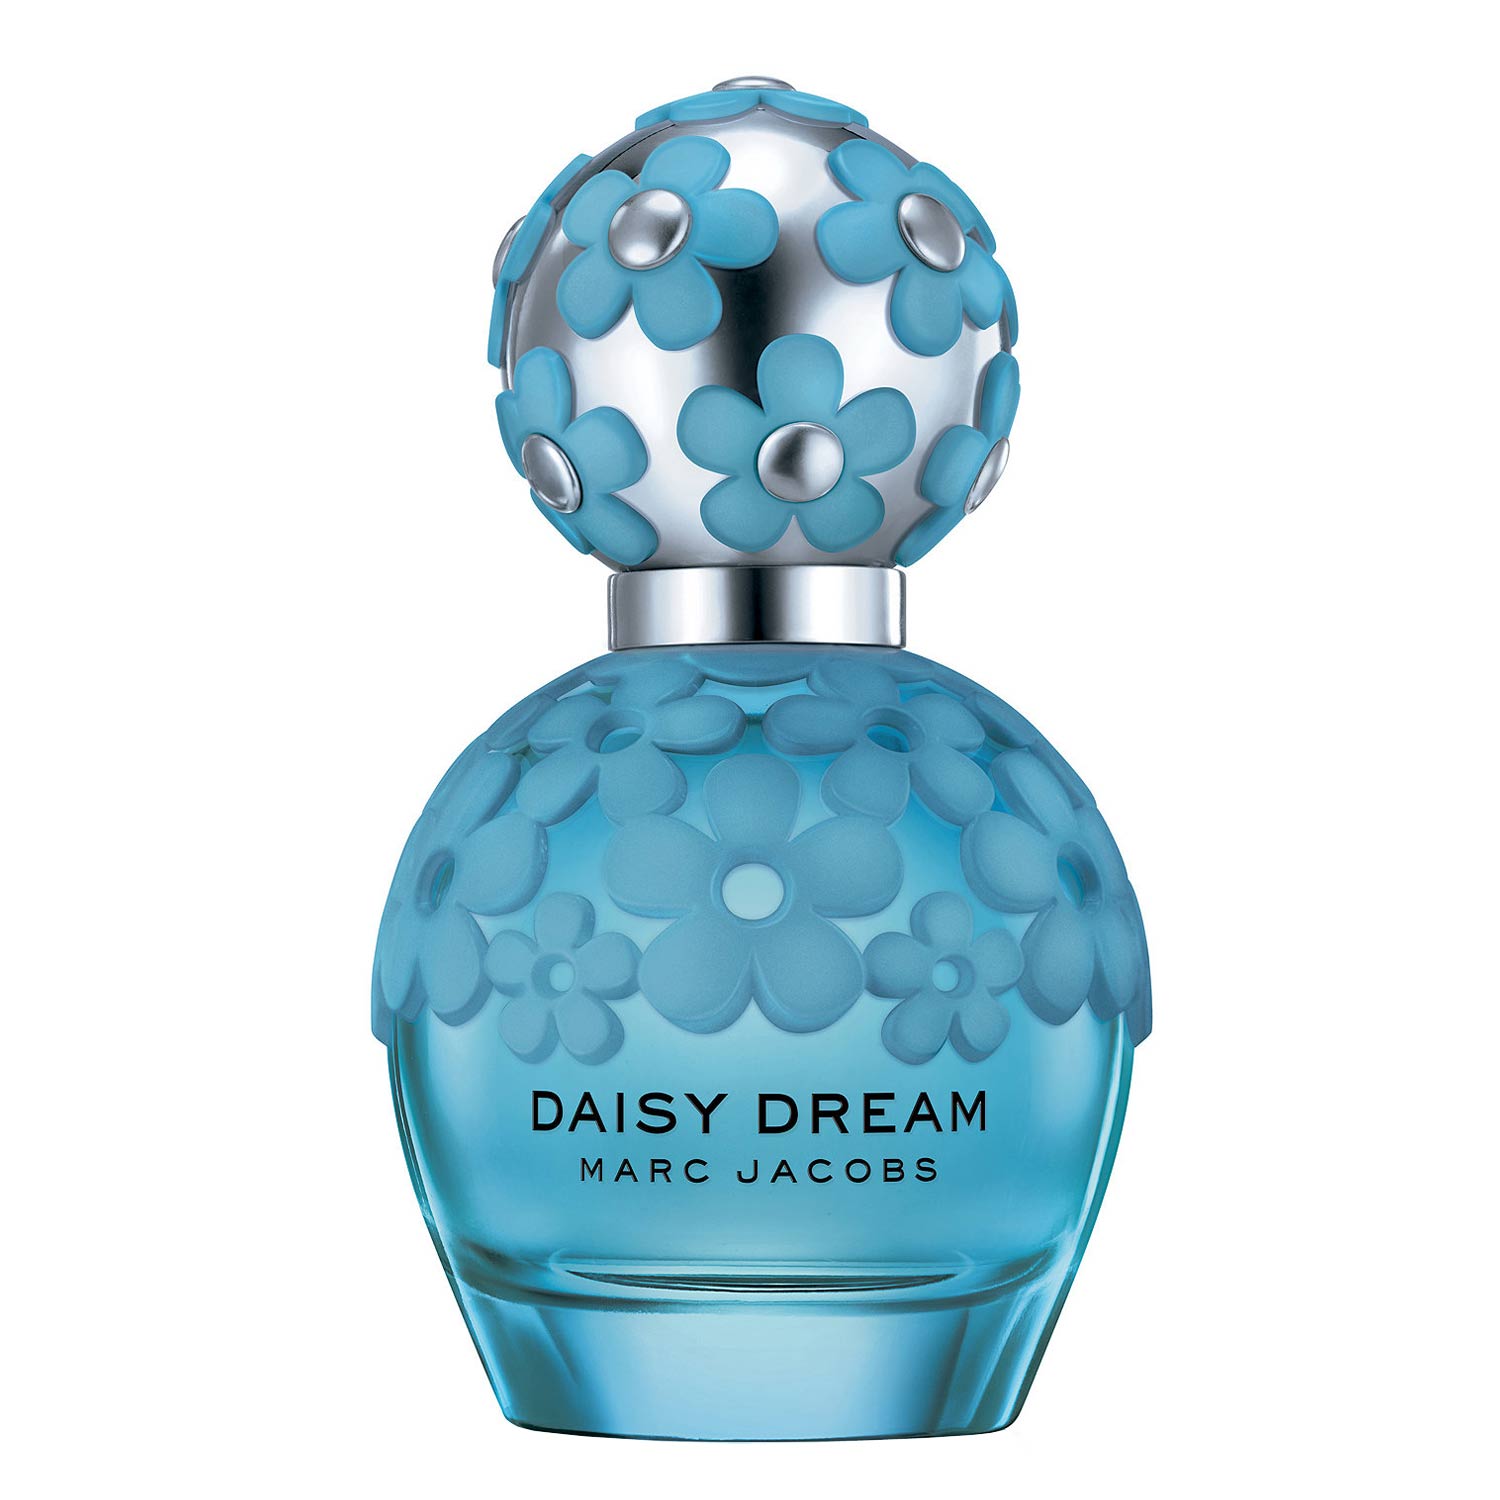 Daisy Dream Forever Marc Jacobs Image